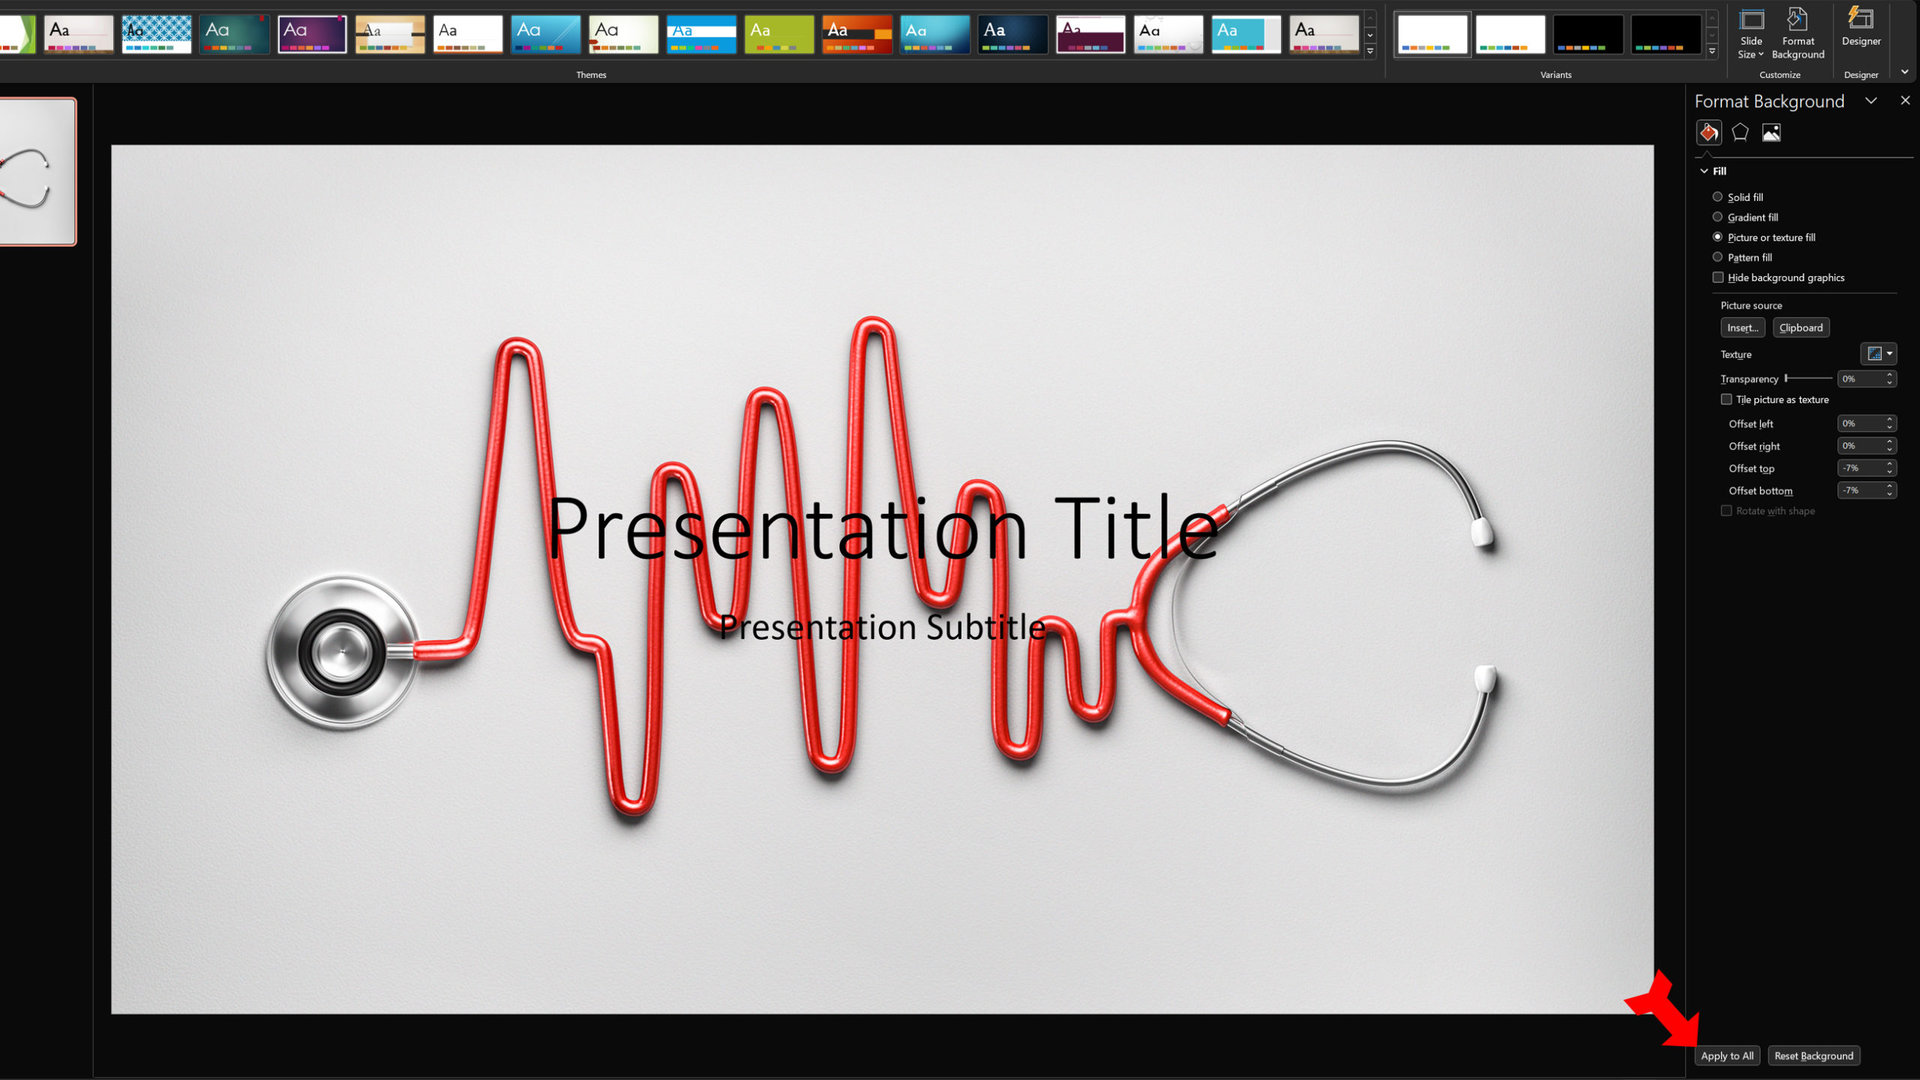 PowerPoint Background Image Click on Apply to All